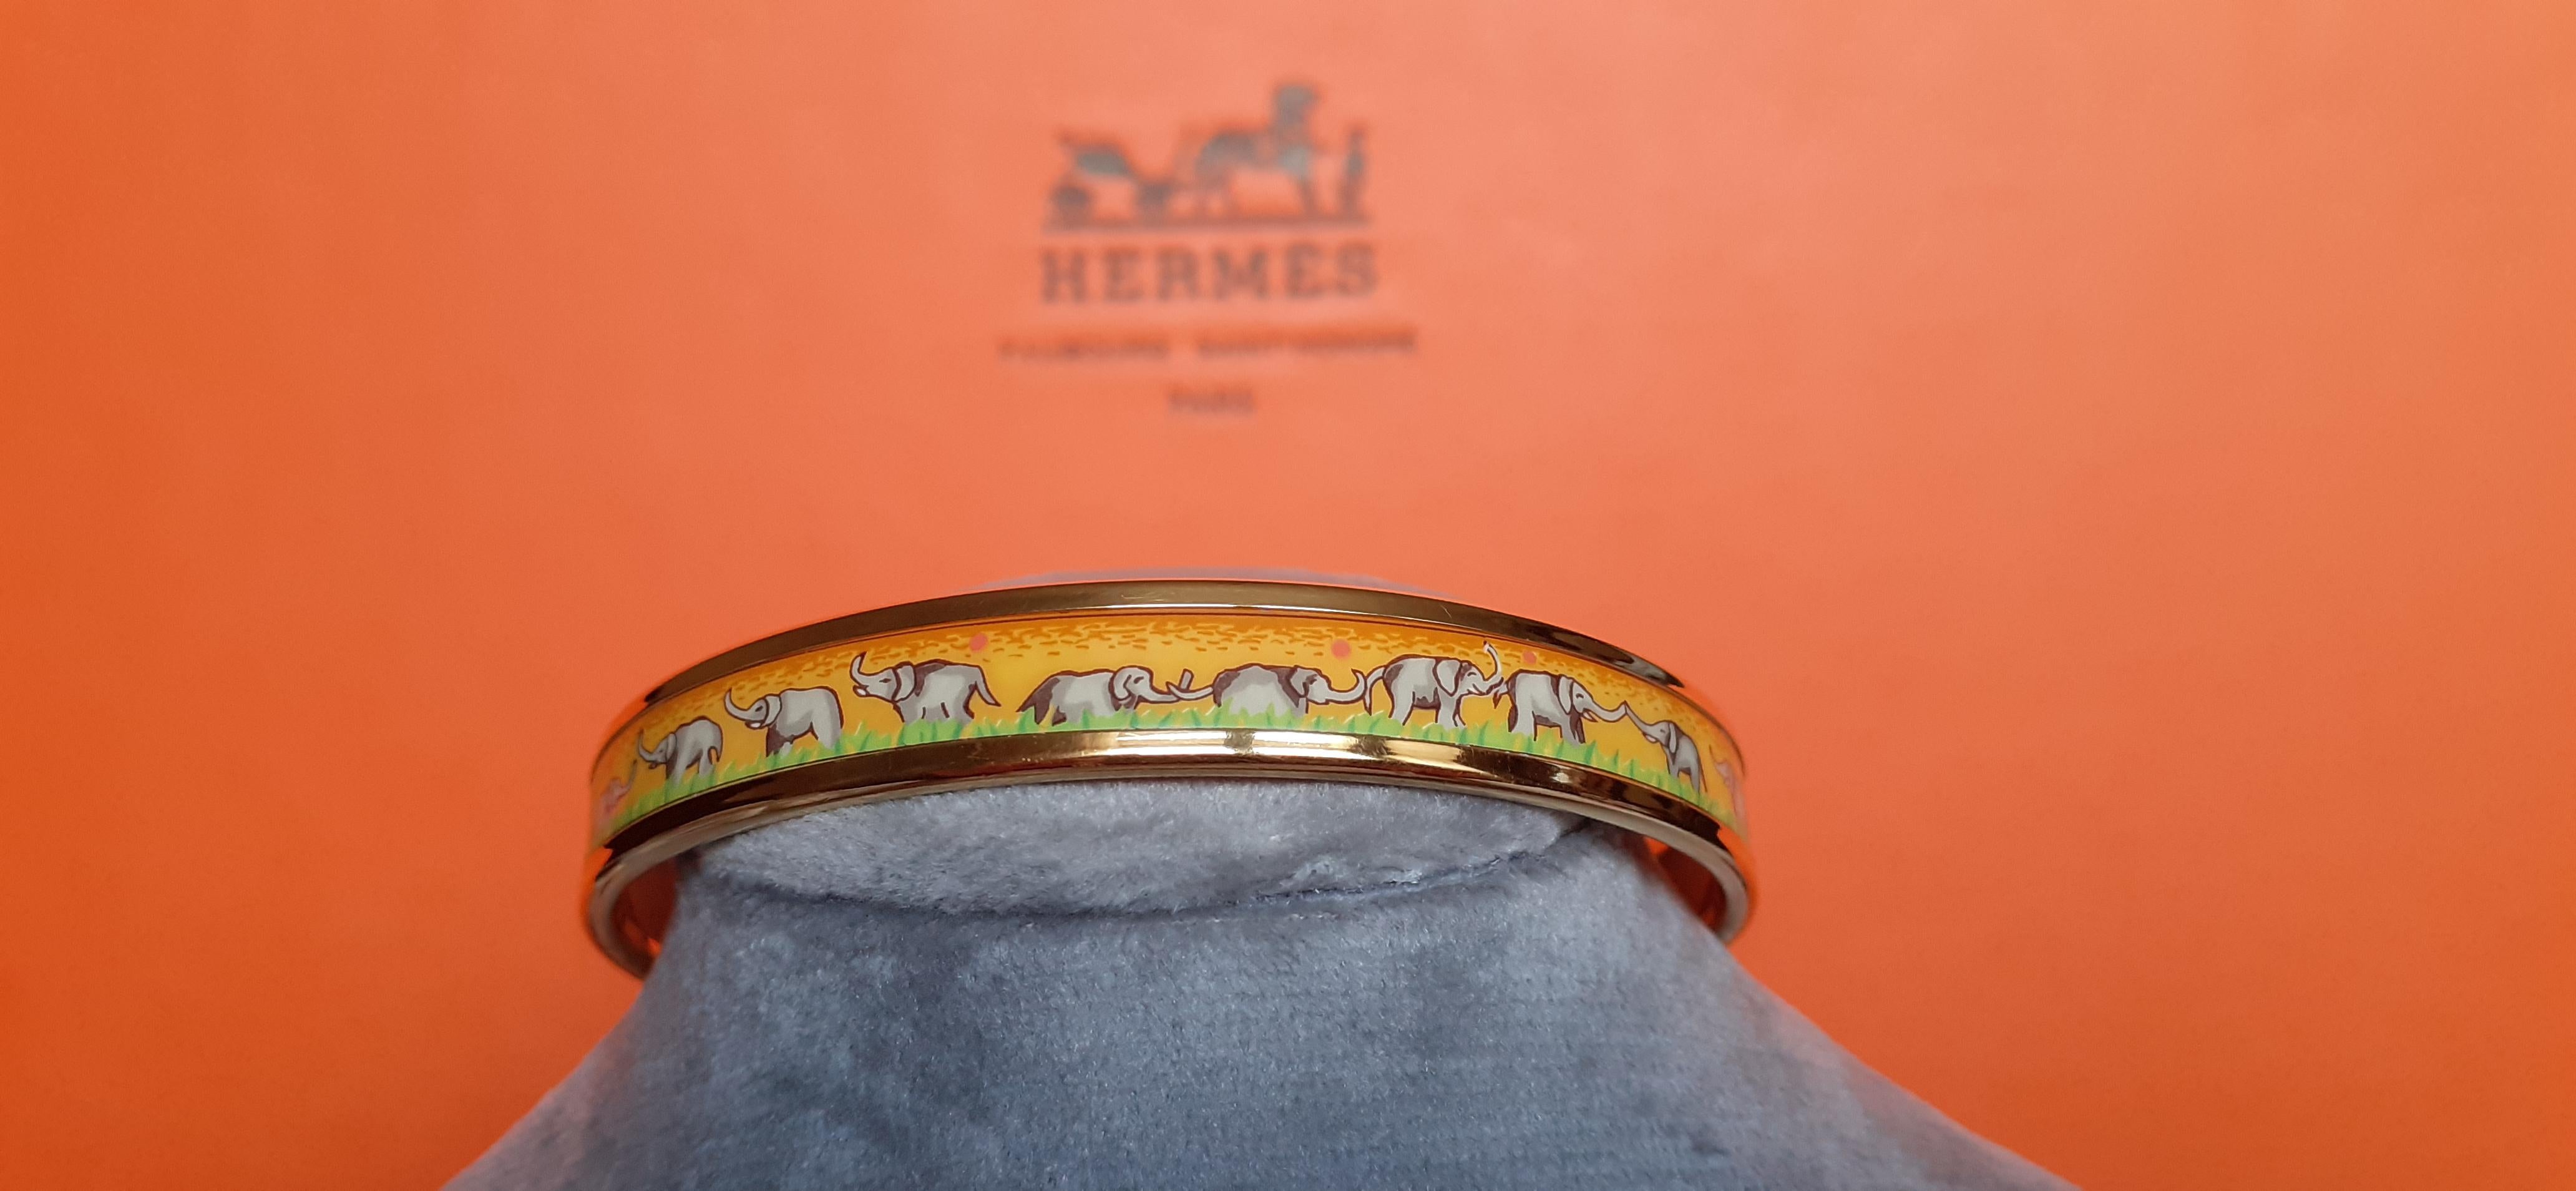 Super Cute Authentic Hermès Bracelet

Print: Elephants Grazing

Hard to find ! One of the most thought after Hermès Bracelet

Made in Austria + I

Made of printed enamel and yellow gold plated hardware

Colorways: Yellow background with discreet